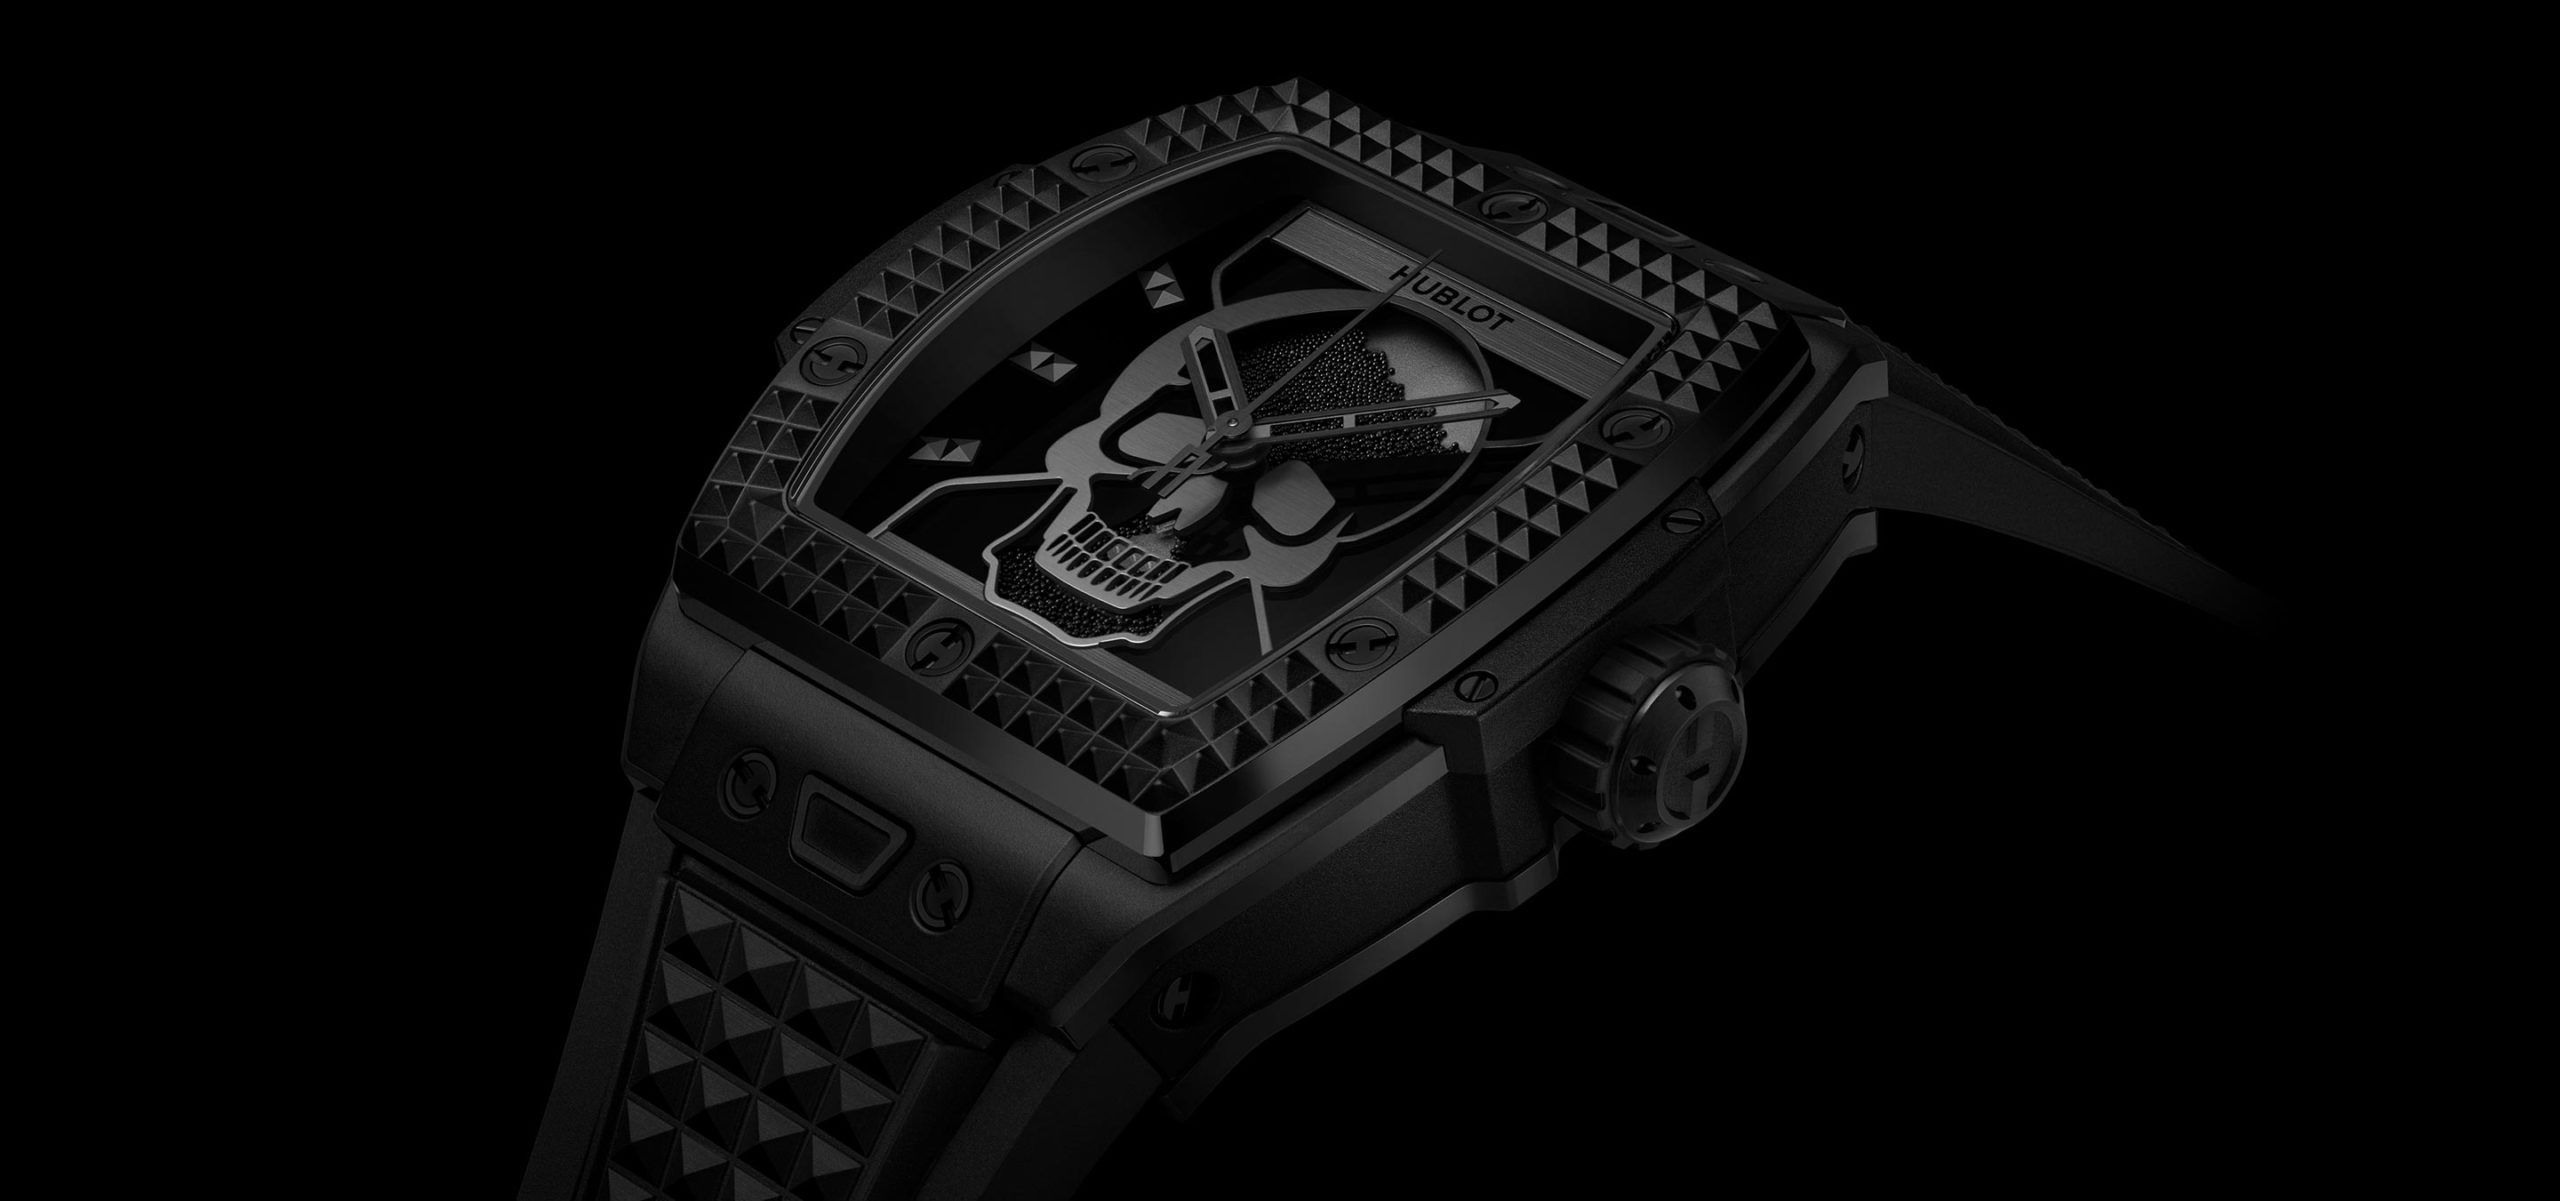 Embrace The 80s Goth Aesthetic With Hublot’s Spirit Of Big Bang Depeche Mode Limited Edition